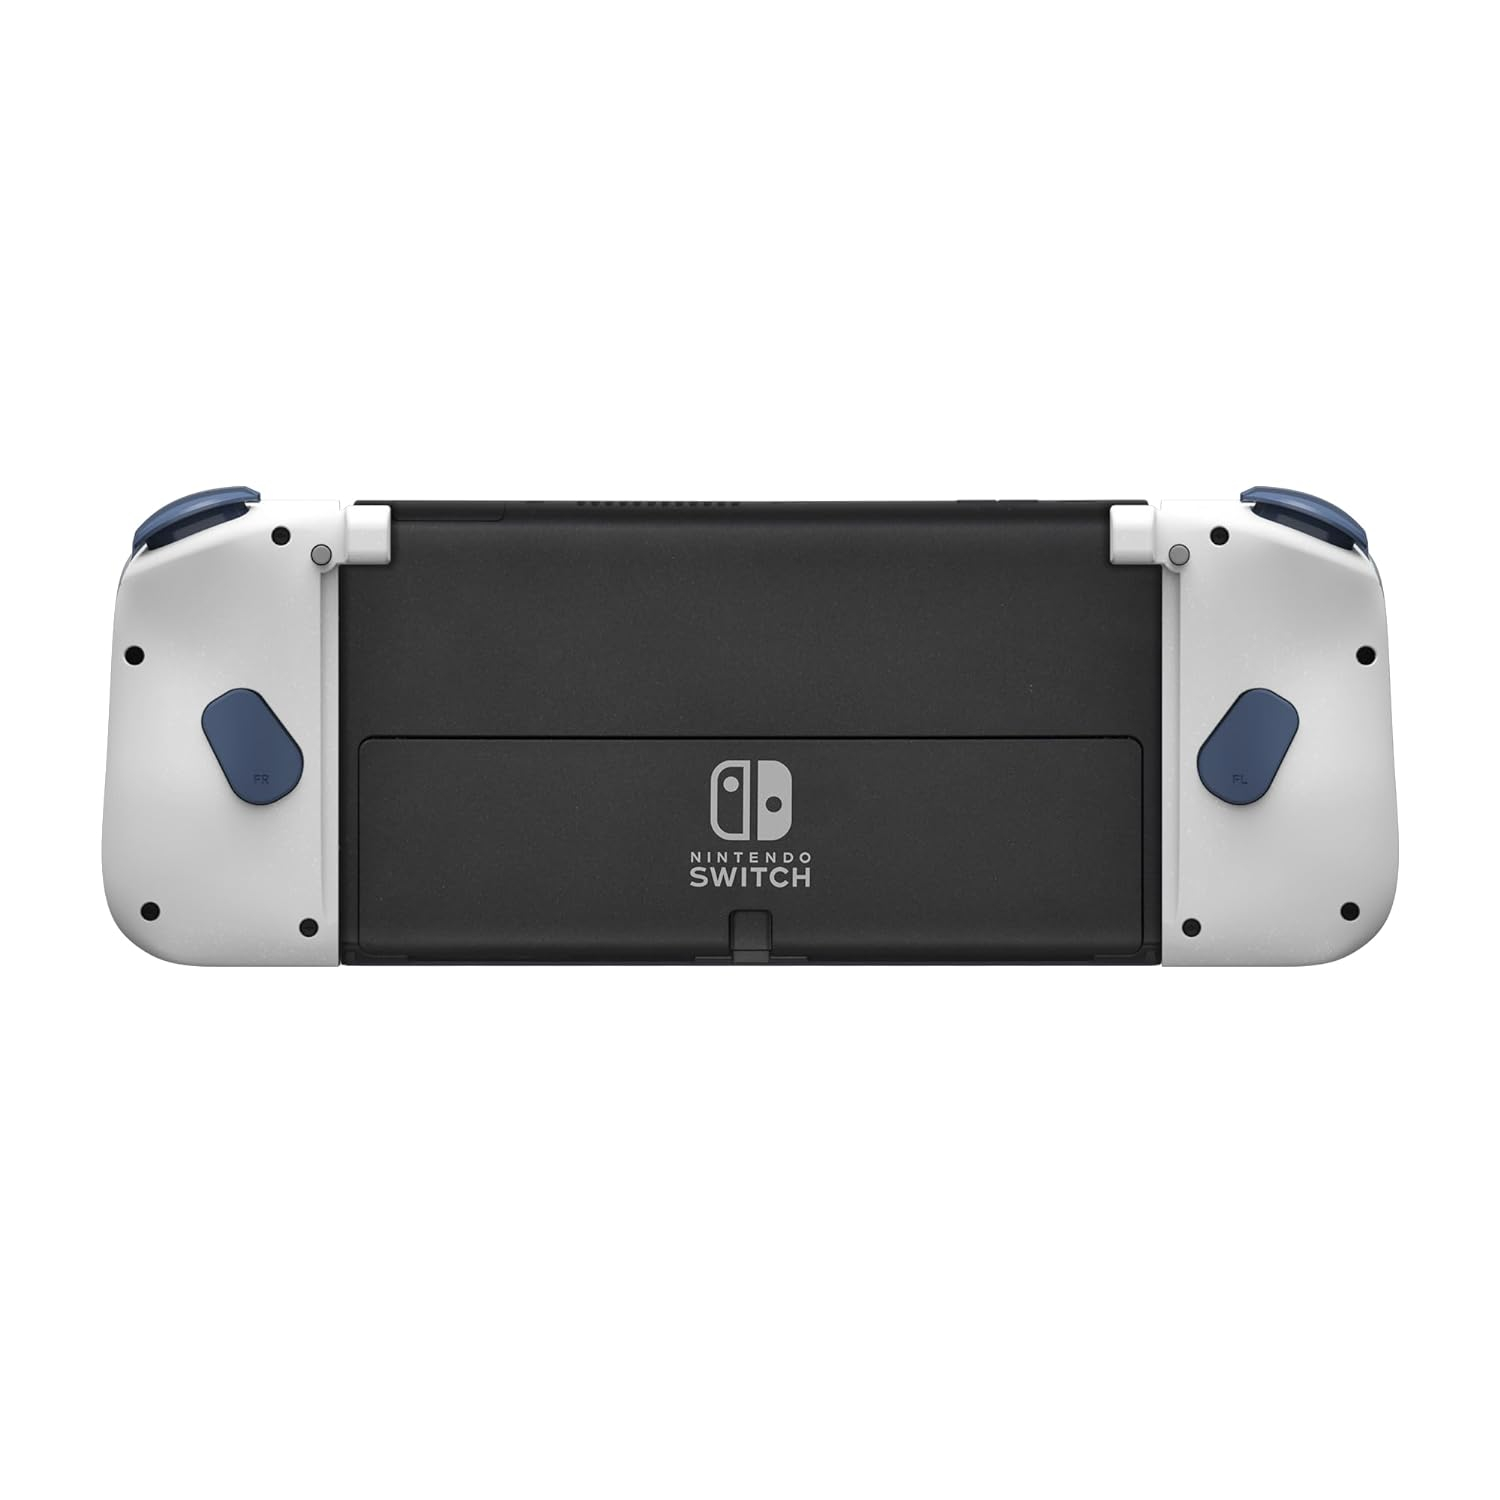 HORI Split Pad Compact Attachment Set (Eevee) for Nintendo Switch - Officially Licensed By Nintendo and The Pokémon Company International